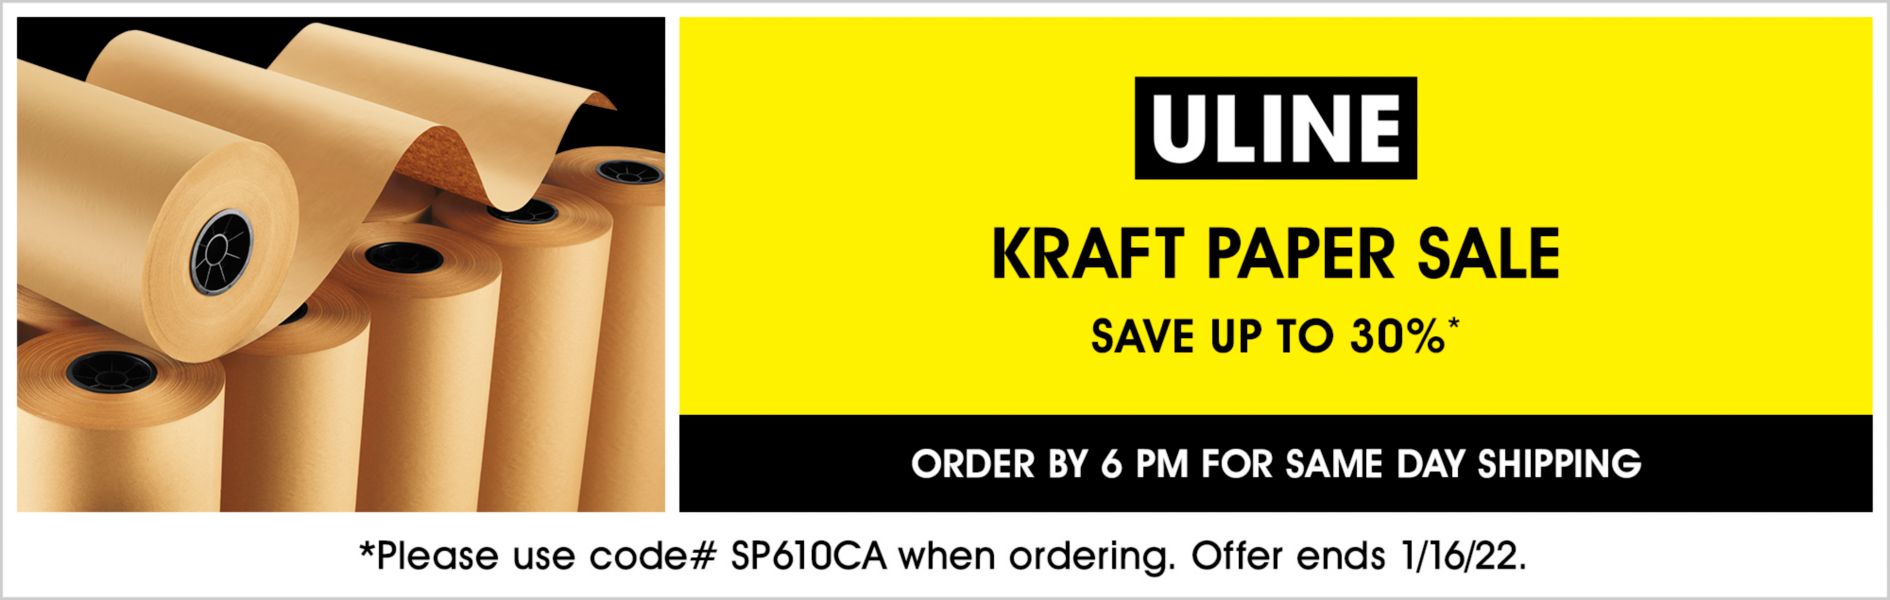 SP610CA Kraft Paper Sale, Save up to 30%, Use code SP610CA, Offer ends 1/16/22